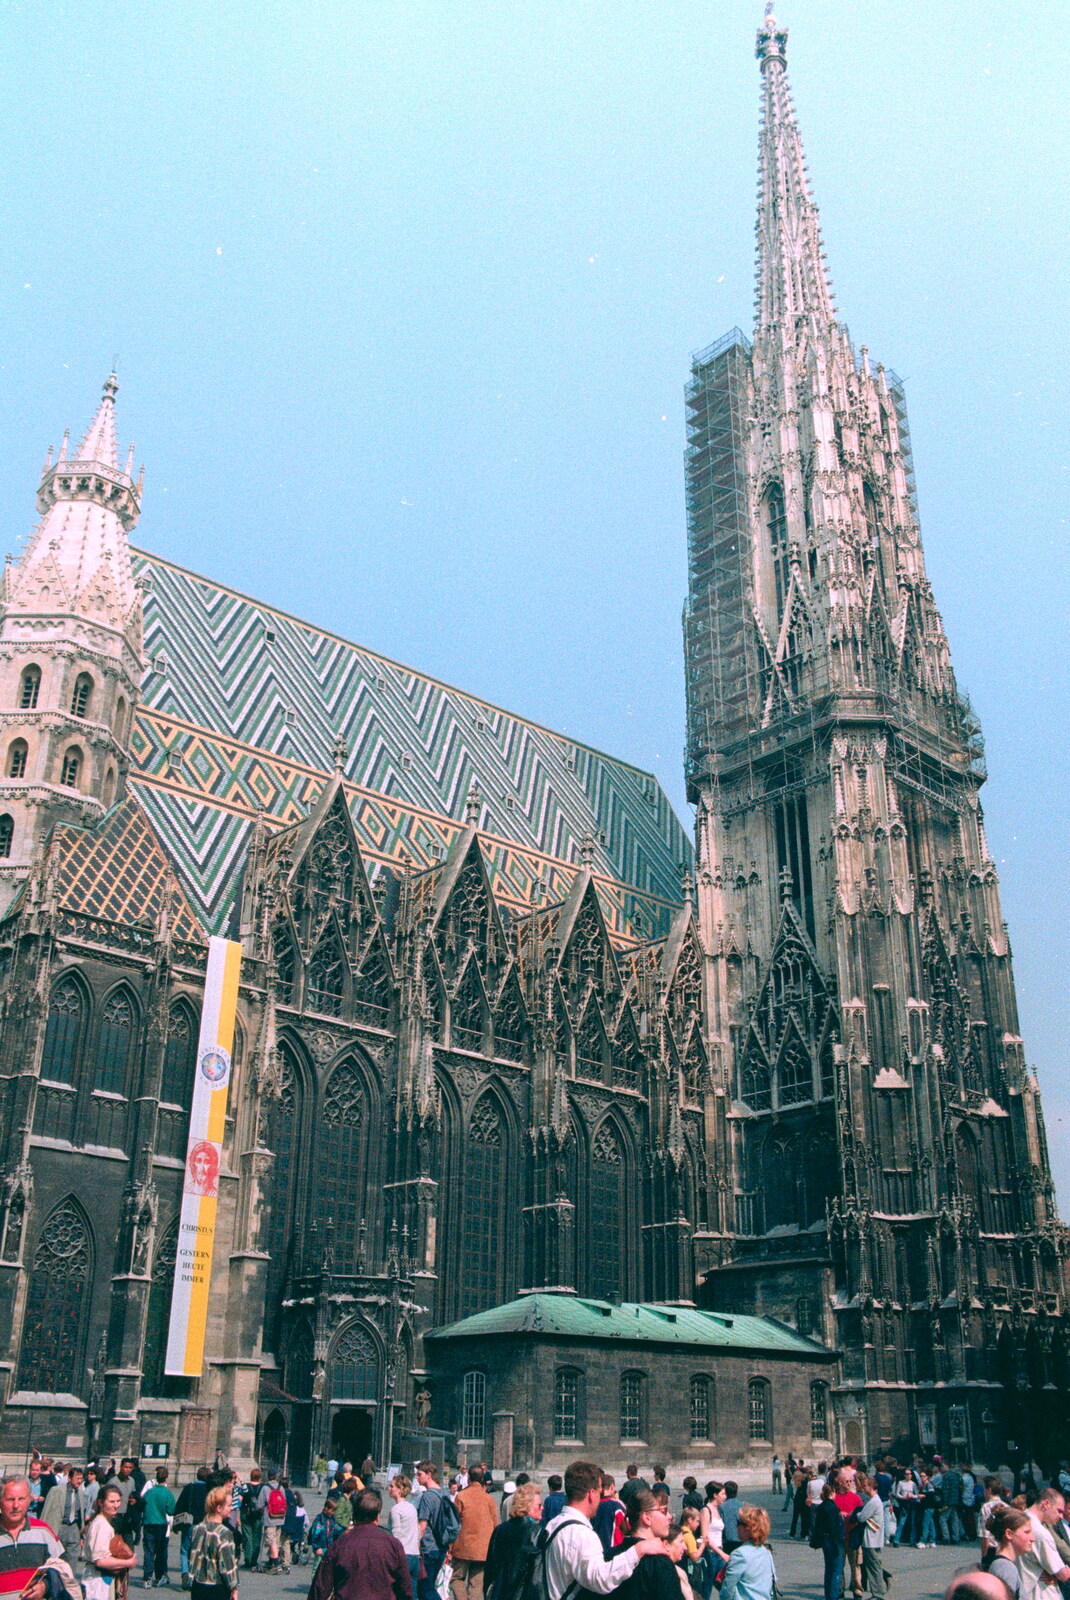 St. Stephen's Cathedral, Vienna from A Postcard From Hofburg Palace, Vienna, Austria - 18th April 2000